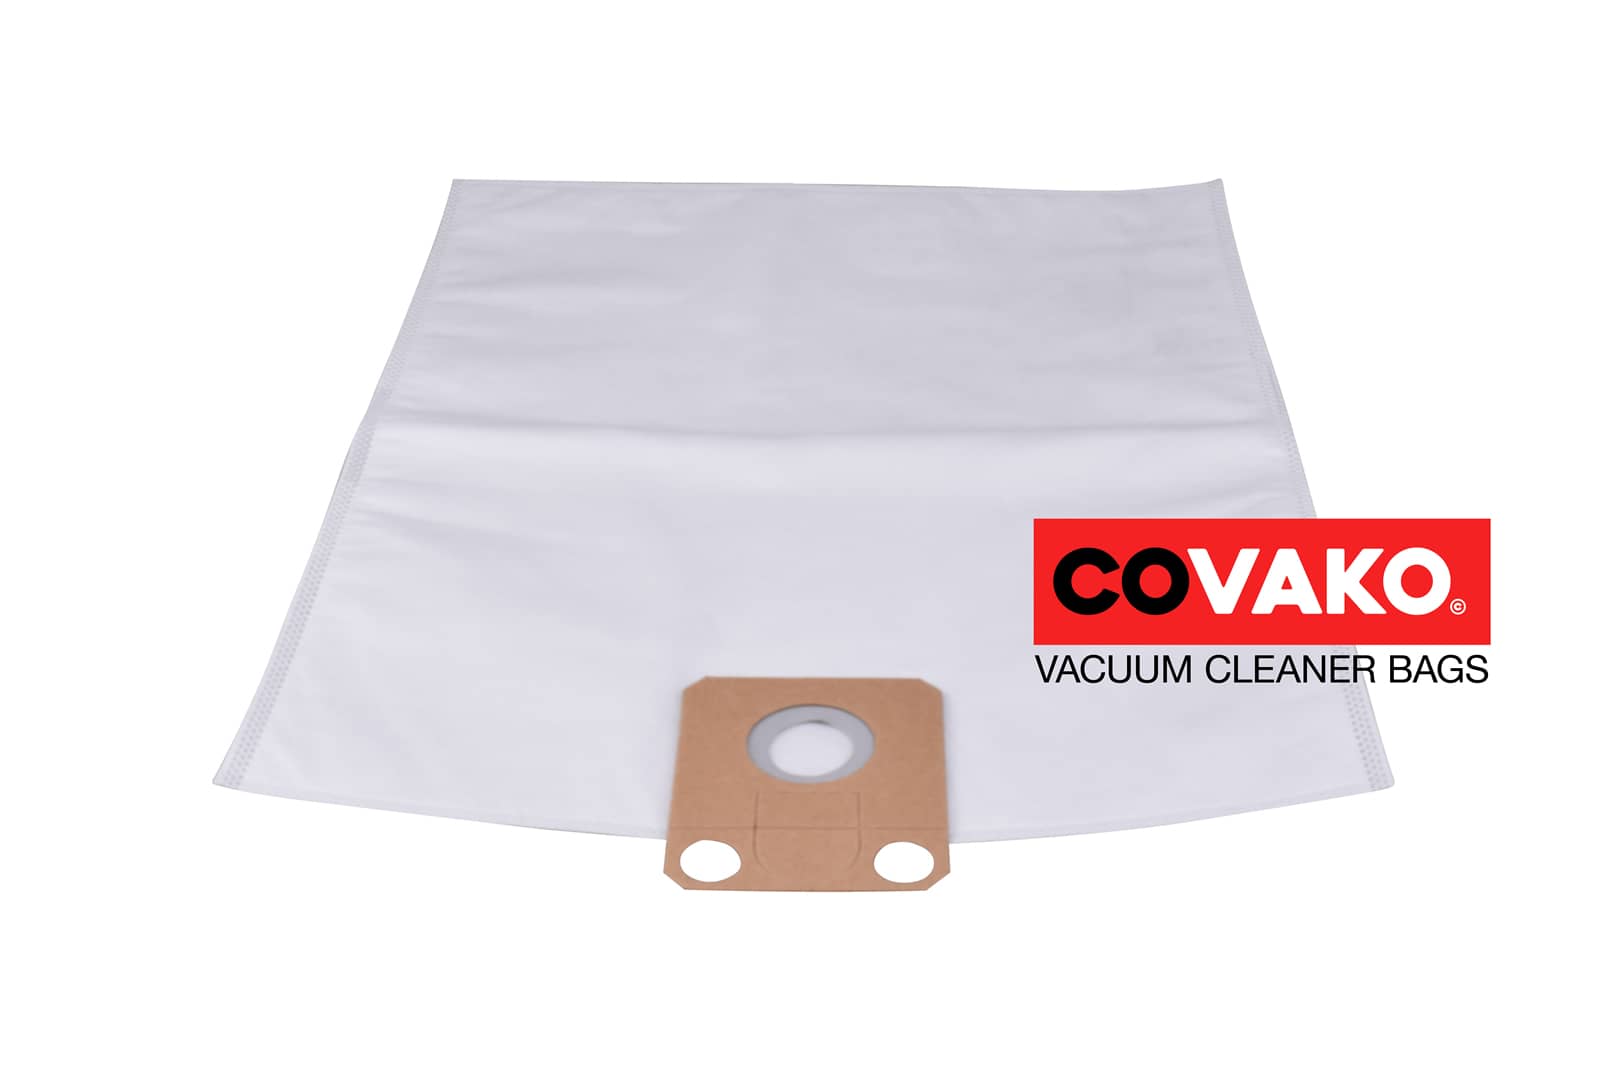 Wap Family / Synthesis - Wap vacuum cleaner bags